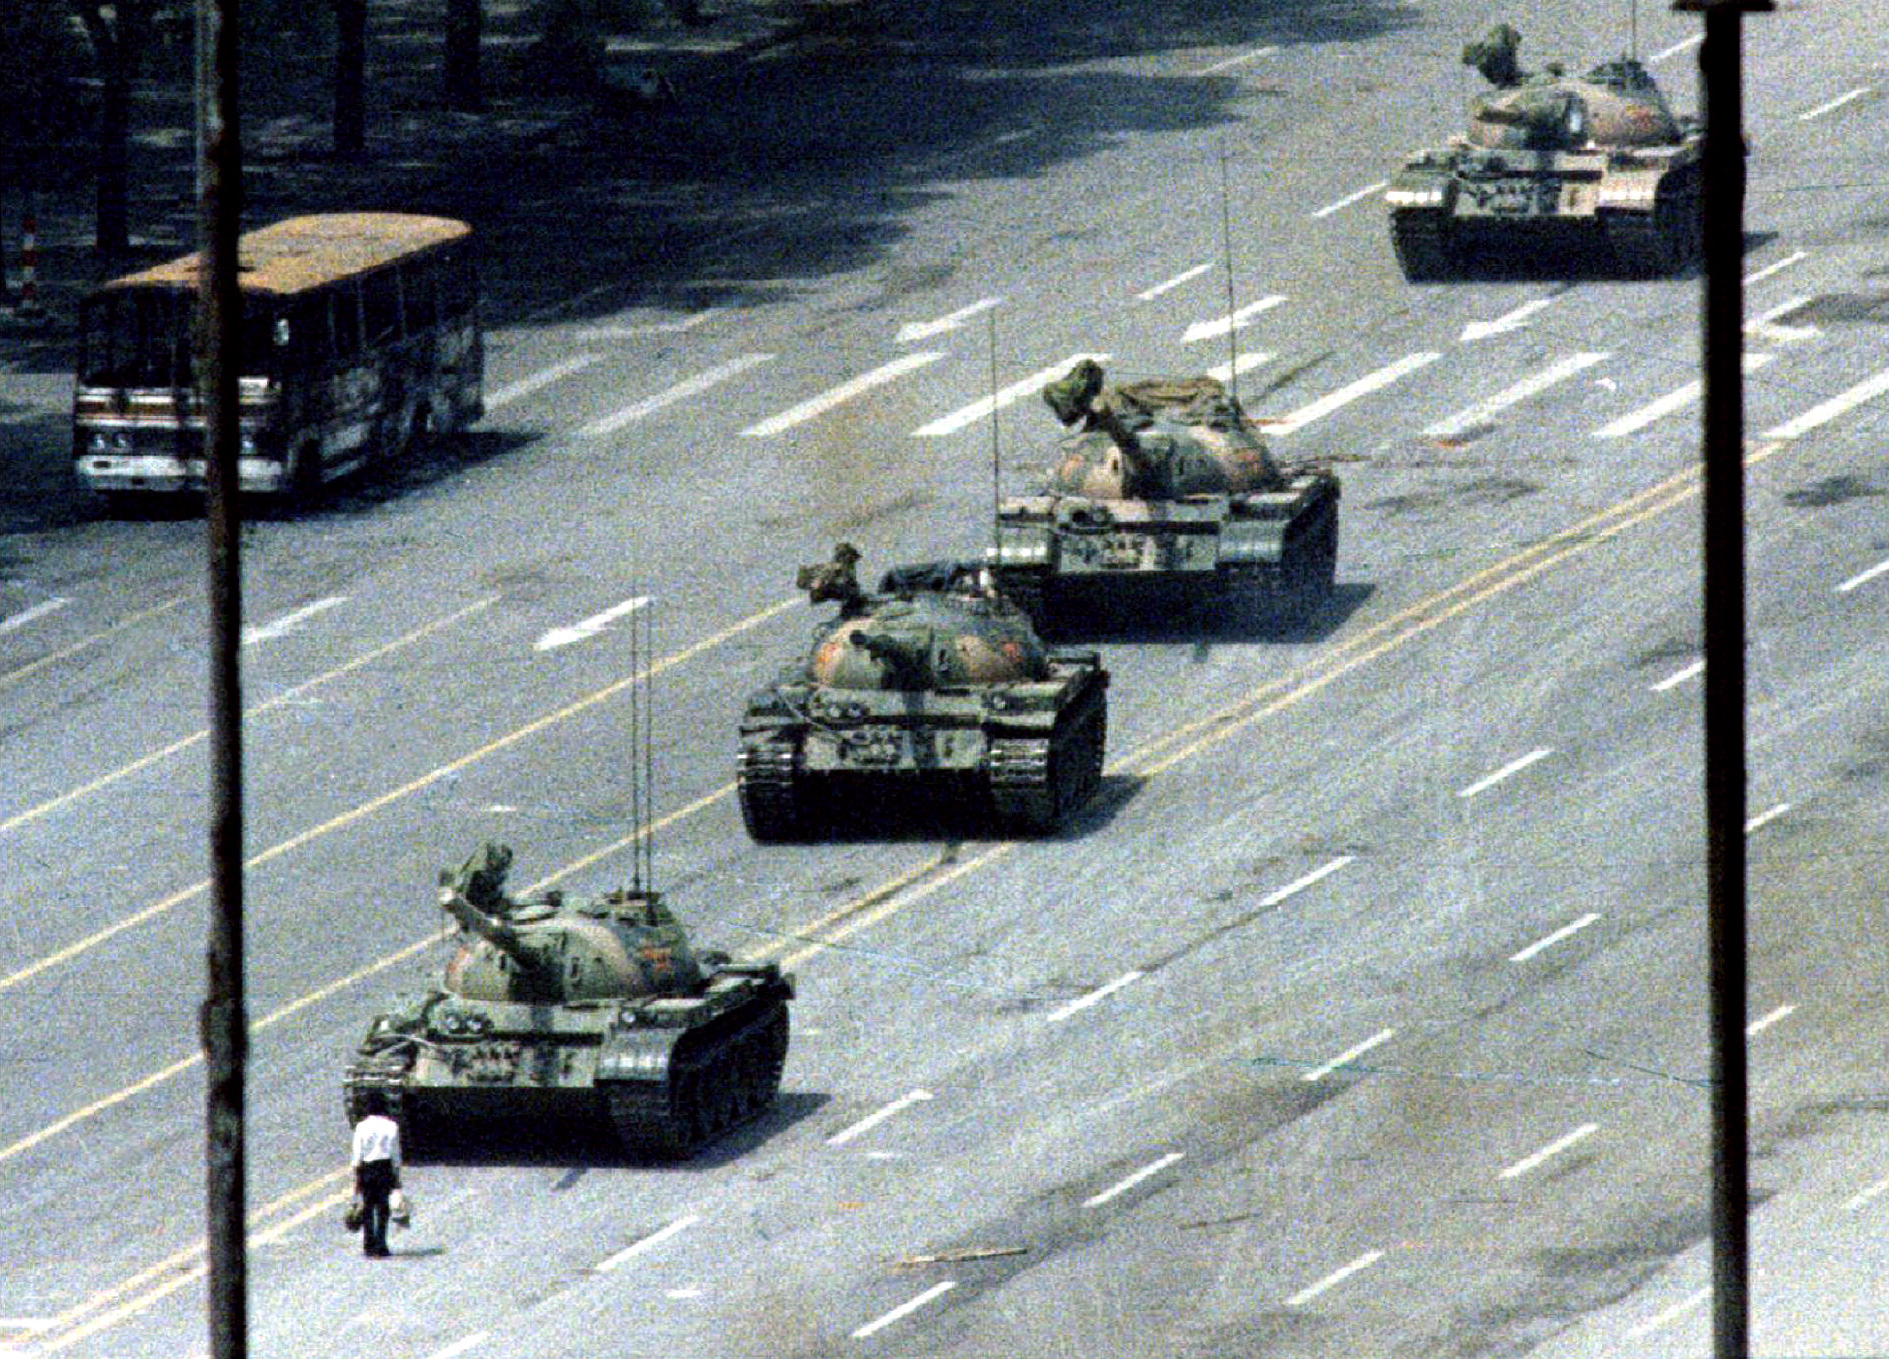 FILE PHOTO 5JUN89 - A Peking citizen stands passively in front of a convoy of tanks on the Avenue of..